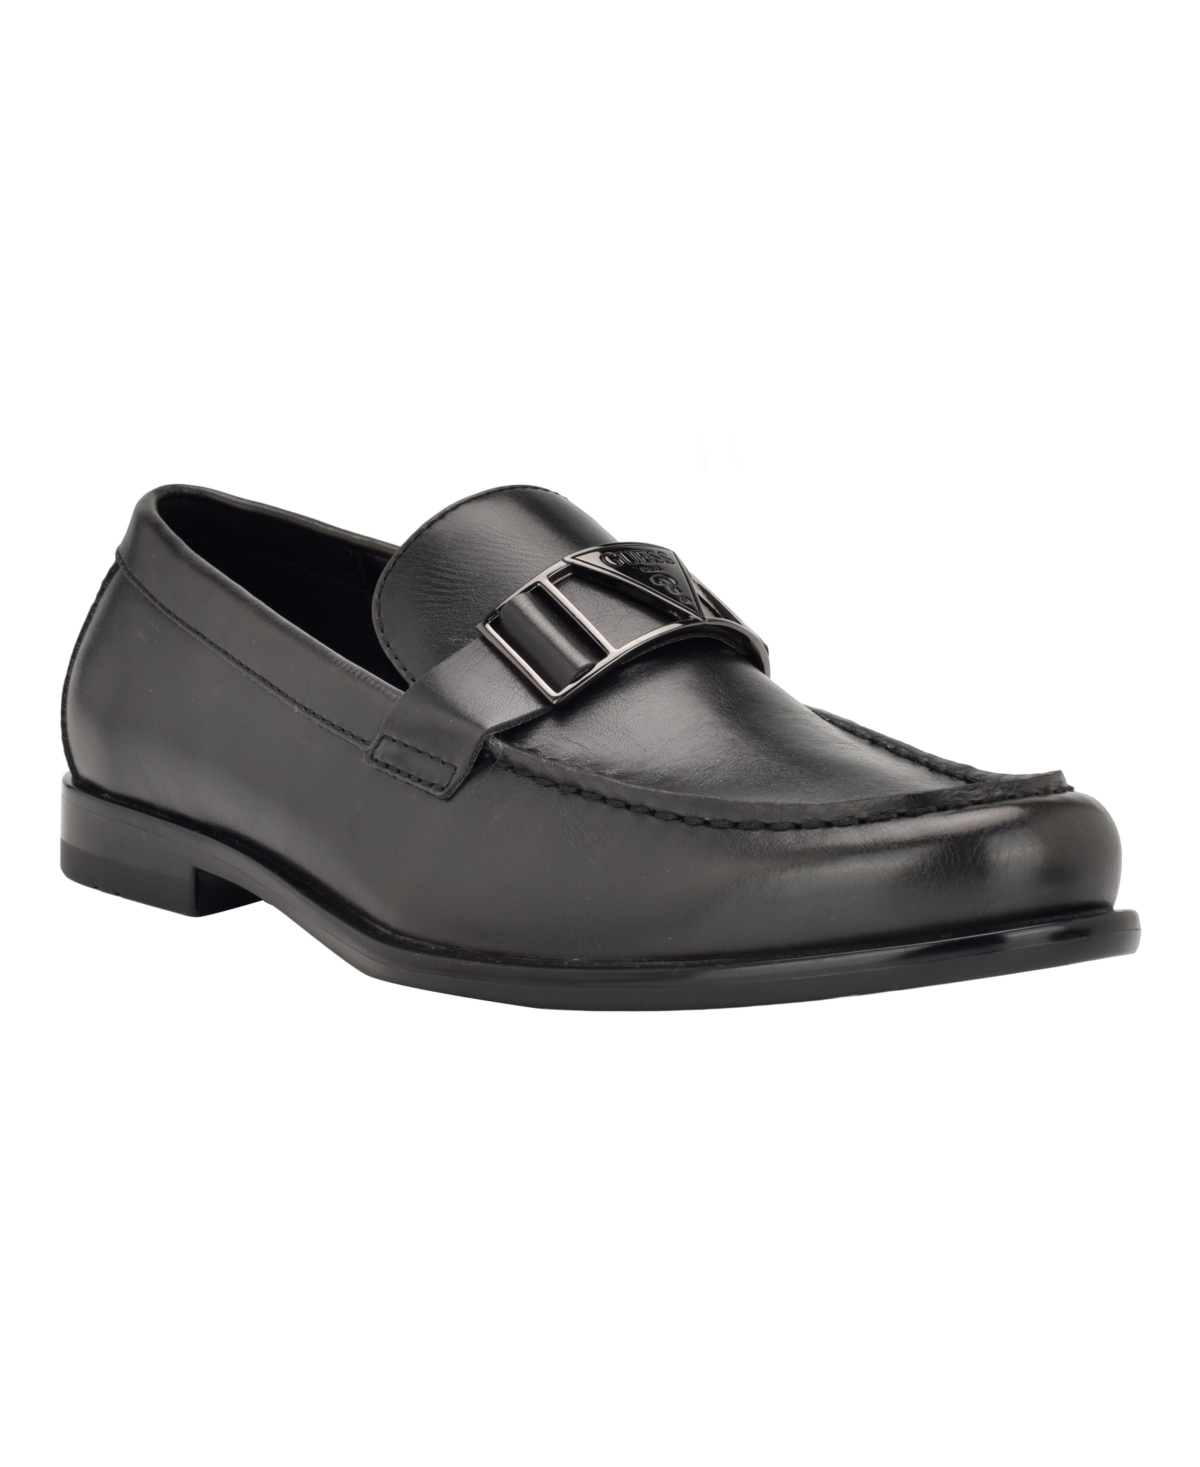 Guess Men's Chandi Moc Toe Slip On Driving Loafers In Black